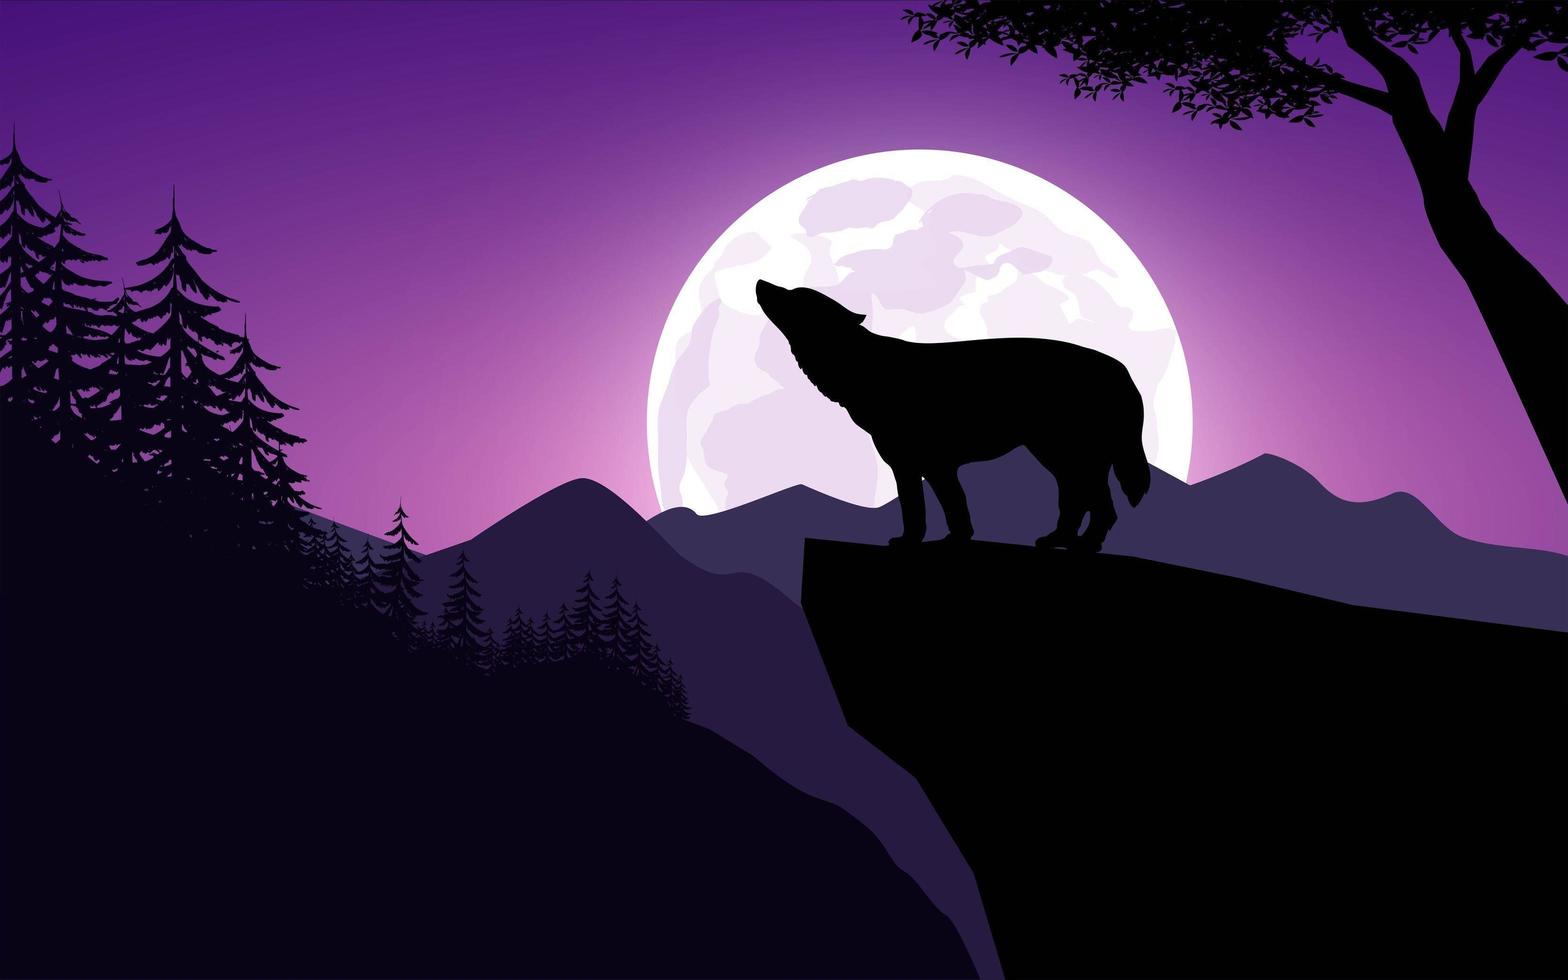 Howling Wolf Silhouette Illustration vector